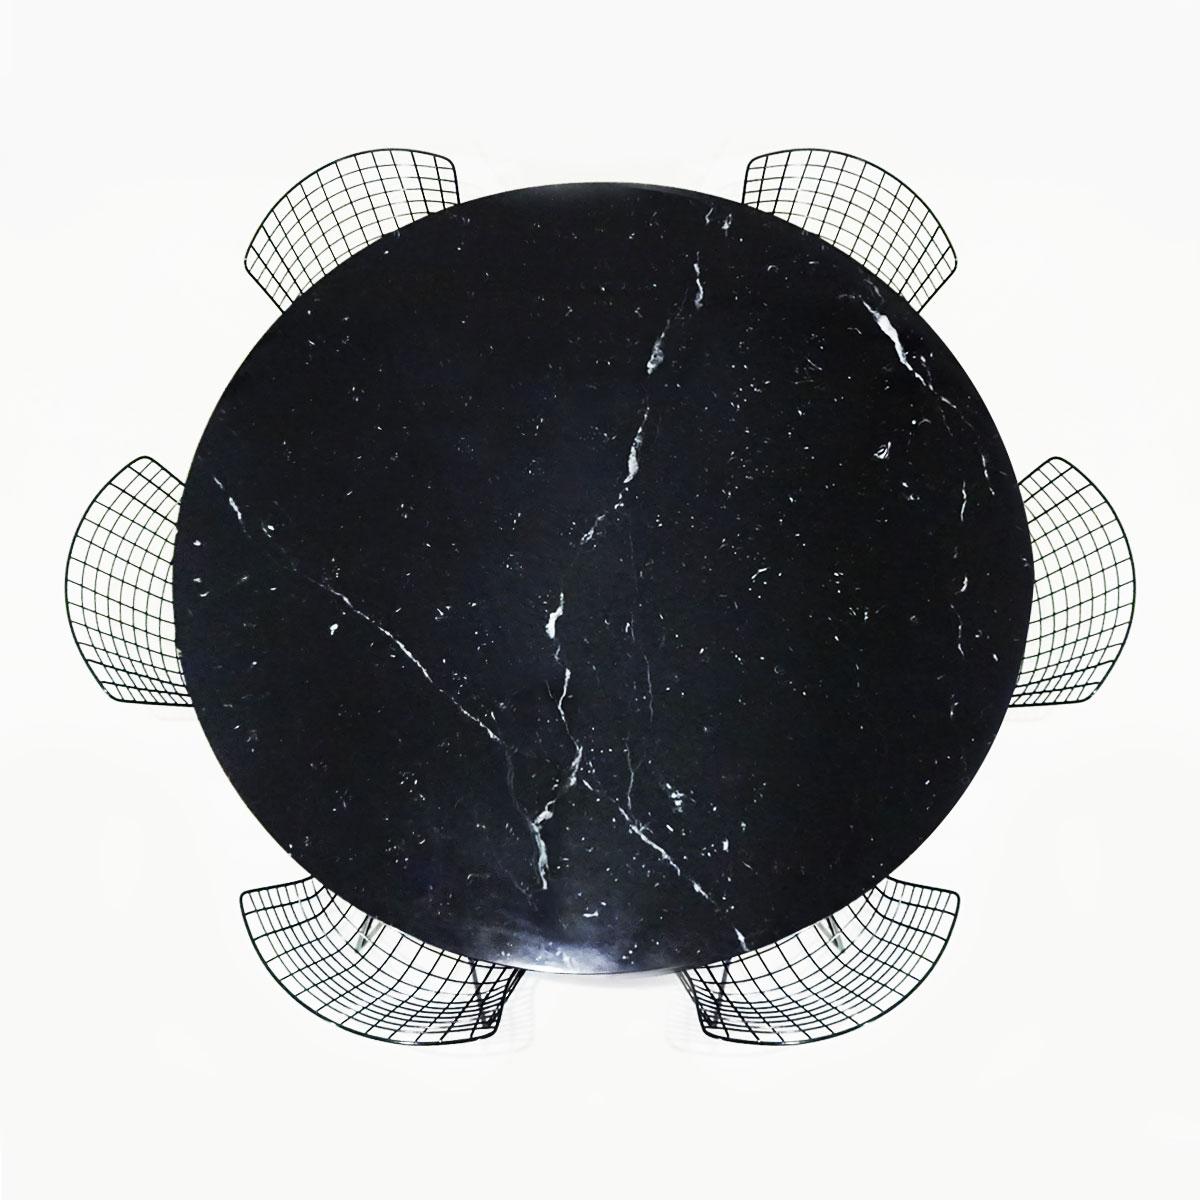 A Classic midcentury dining set comprising an original black Nero Marquina marble Eero Saarinen round tulip dining table matched to 6 original black Harry Bertoia wire chairs with original seat pads, both produced by Knoll.

This is a Classic